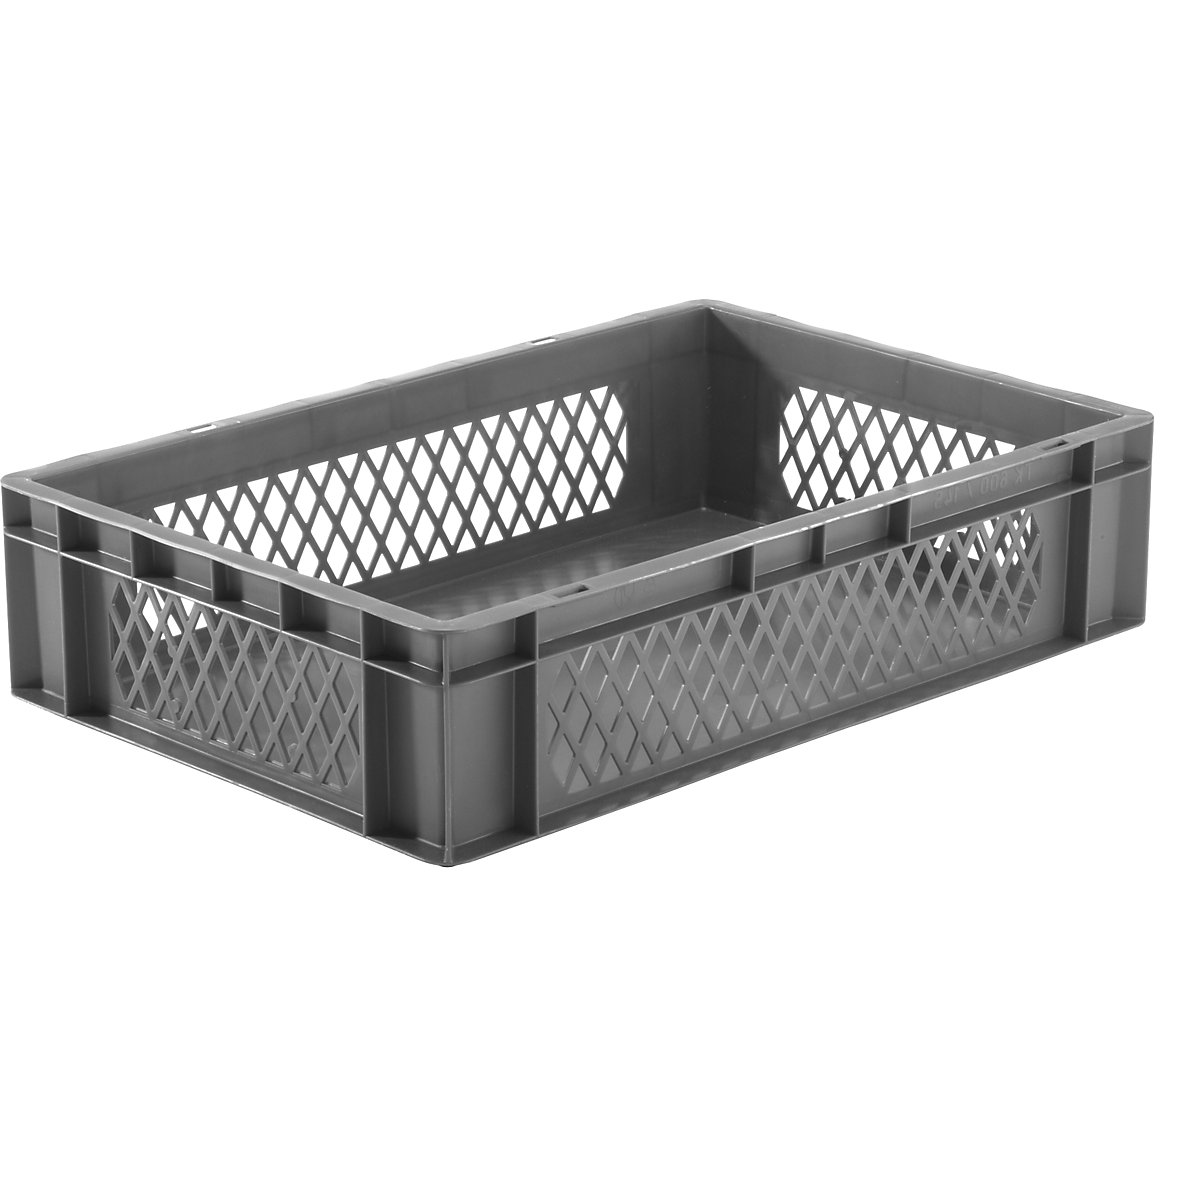 Euro stacking container, perforated walls, closed base, LxWxH 600 x 400 x 145 mm, grey, pack of 5-6